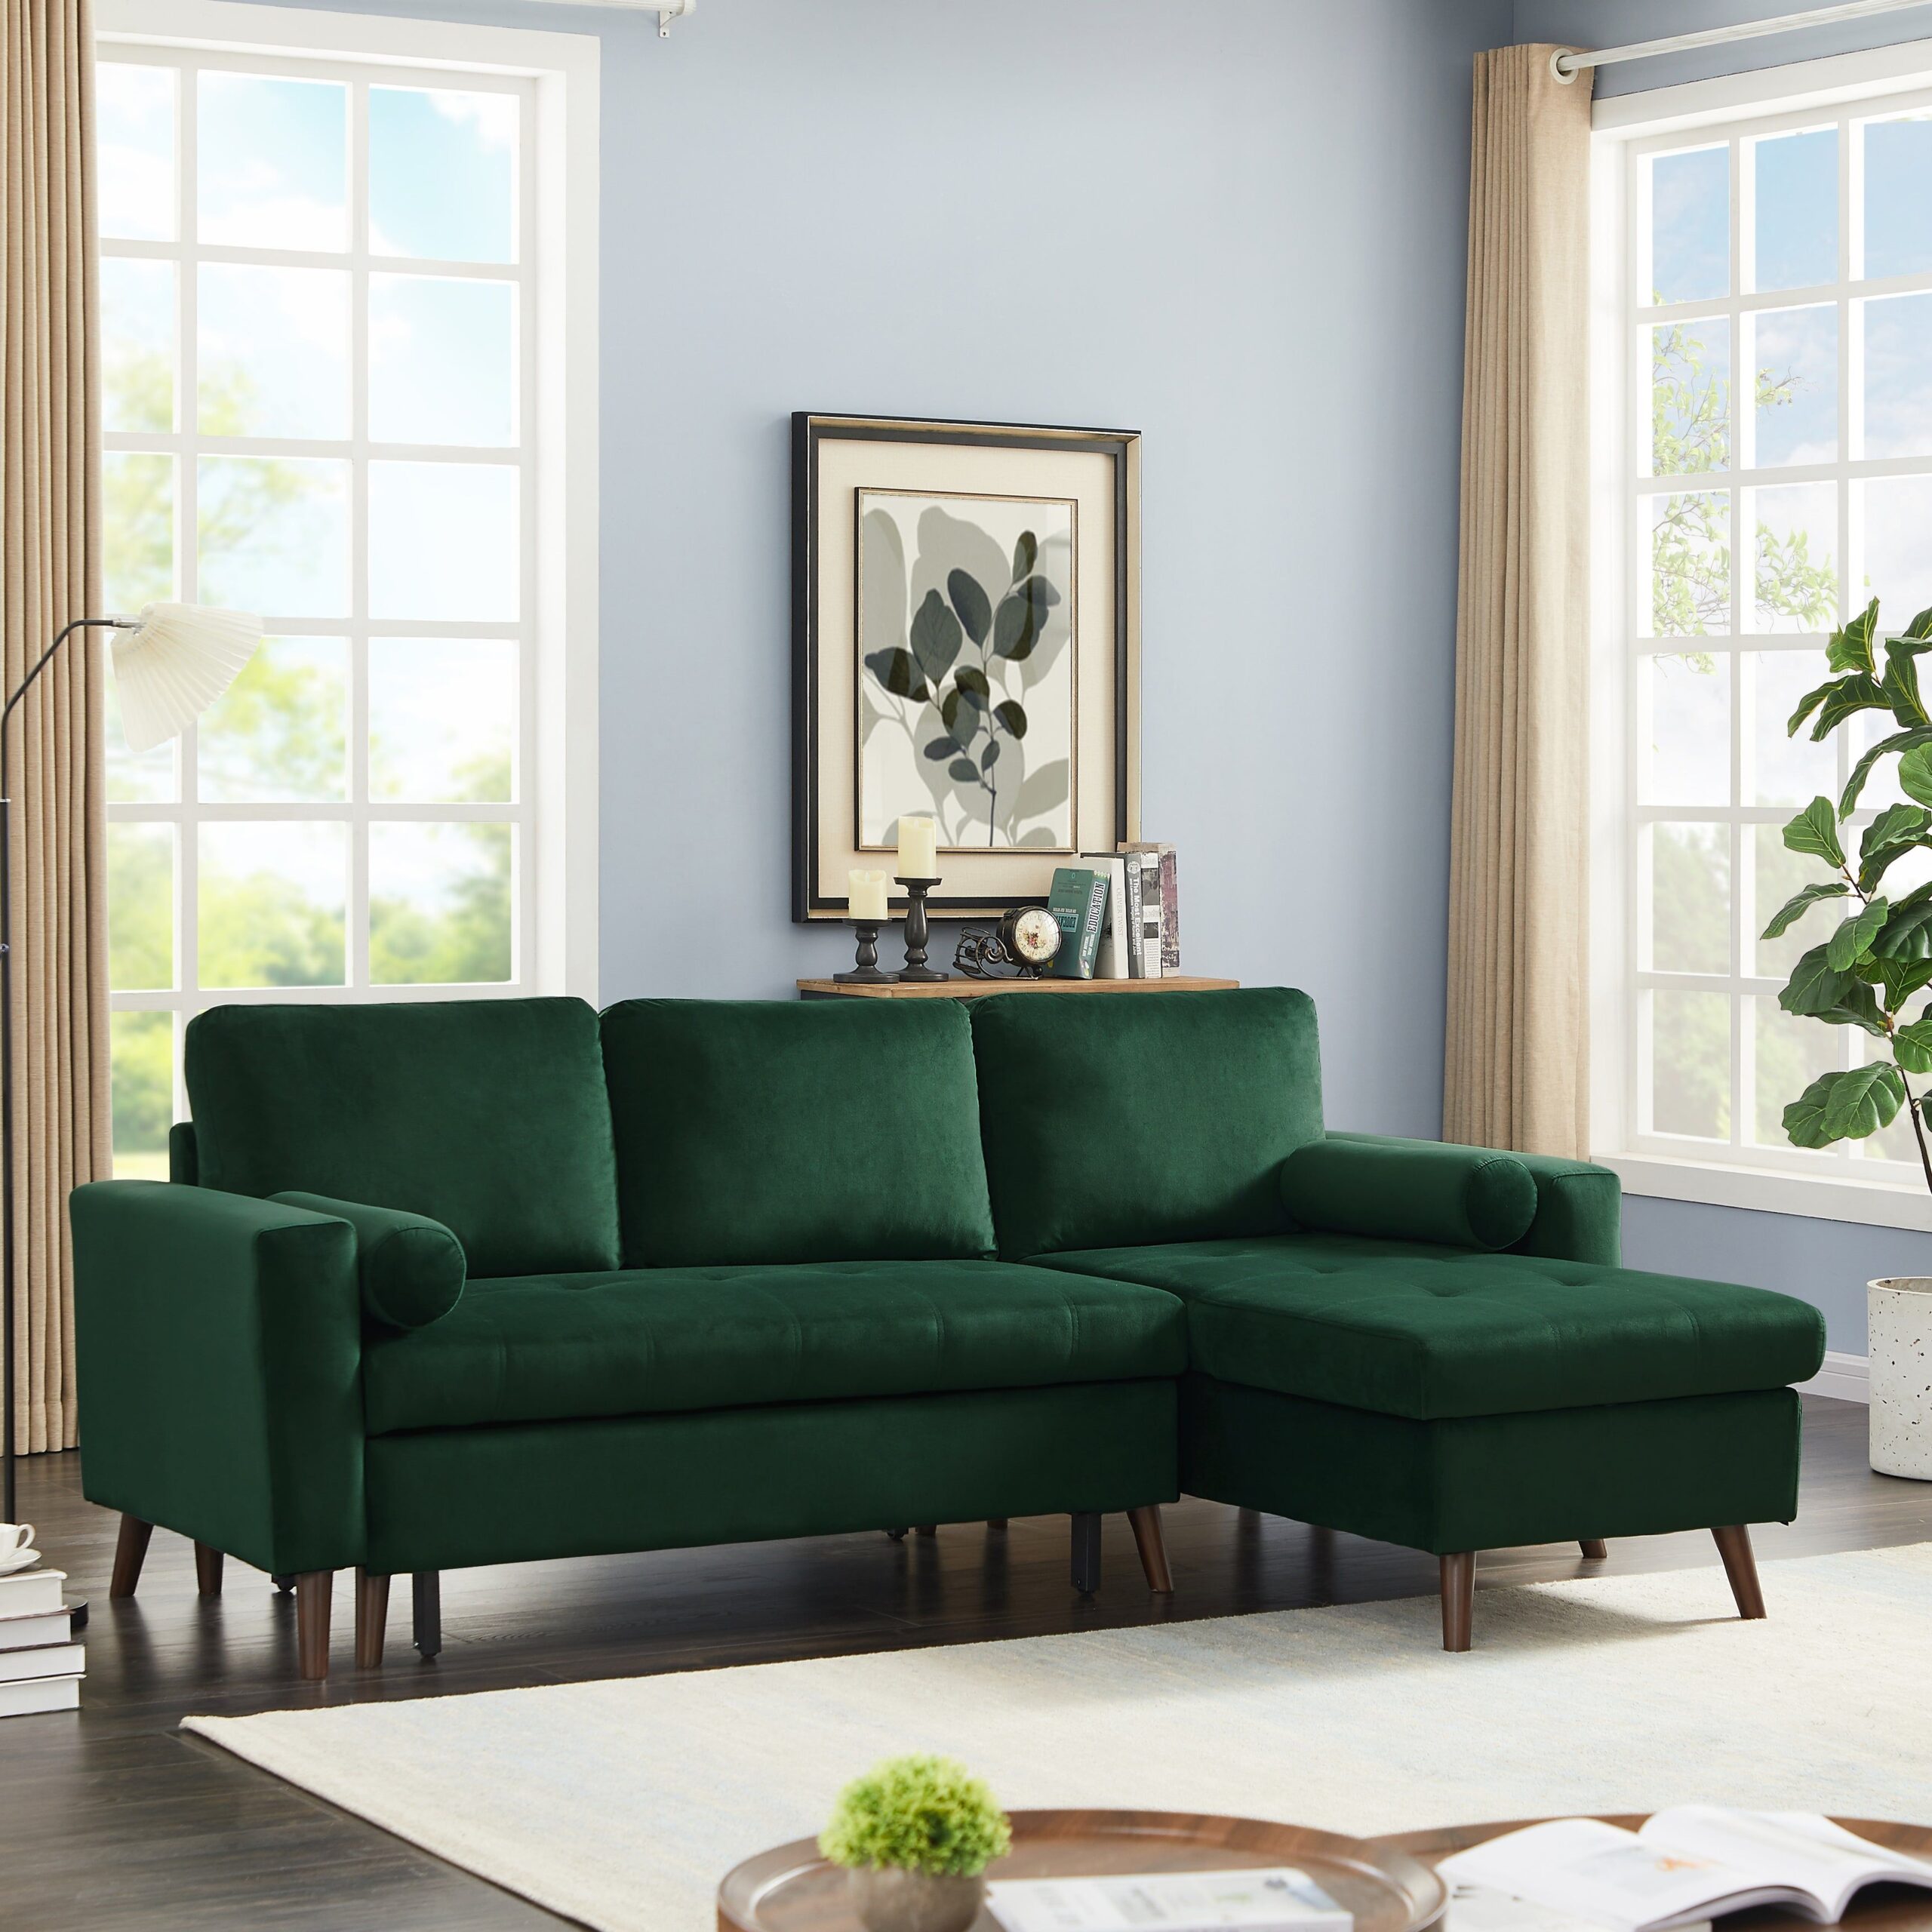 The Versatility of Corner Sofa Beds: A Space-Saving Solution for Any Home